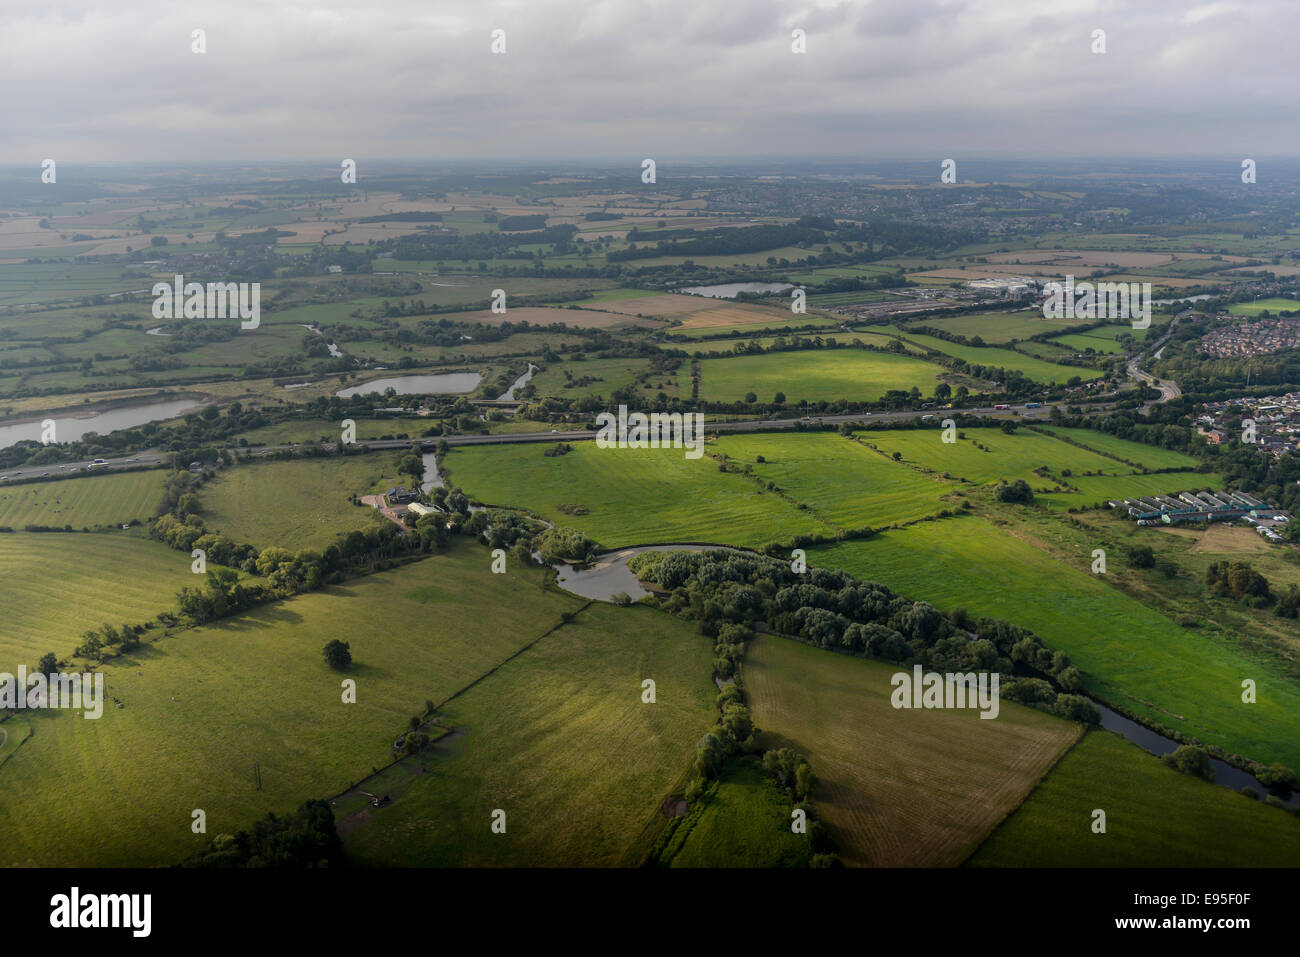 An aerial view of the Staffordshire countryside on an overcast day Stock Photo